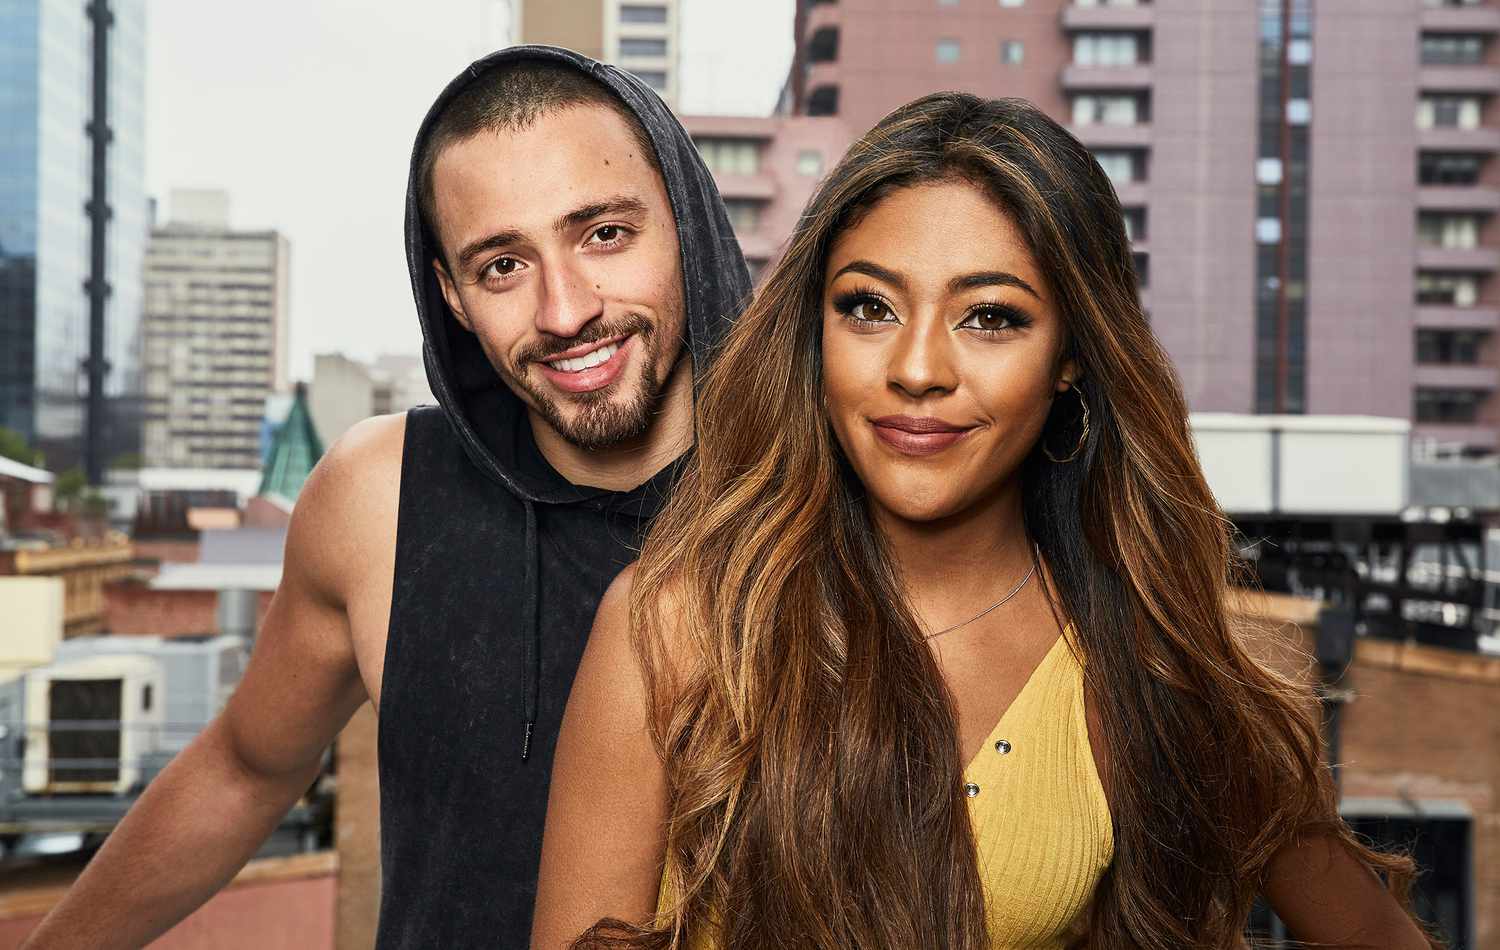 Are You the One: MTV Announces Epic All-Star Challenge Season | PEOPLE.com